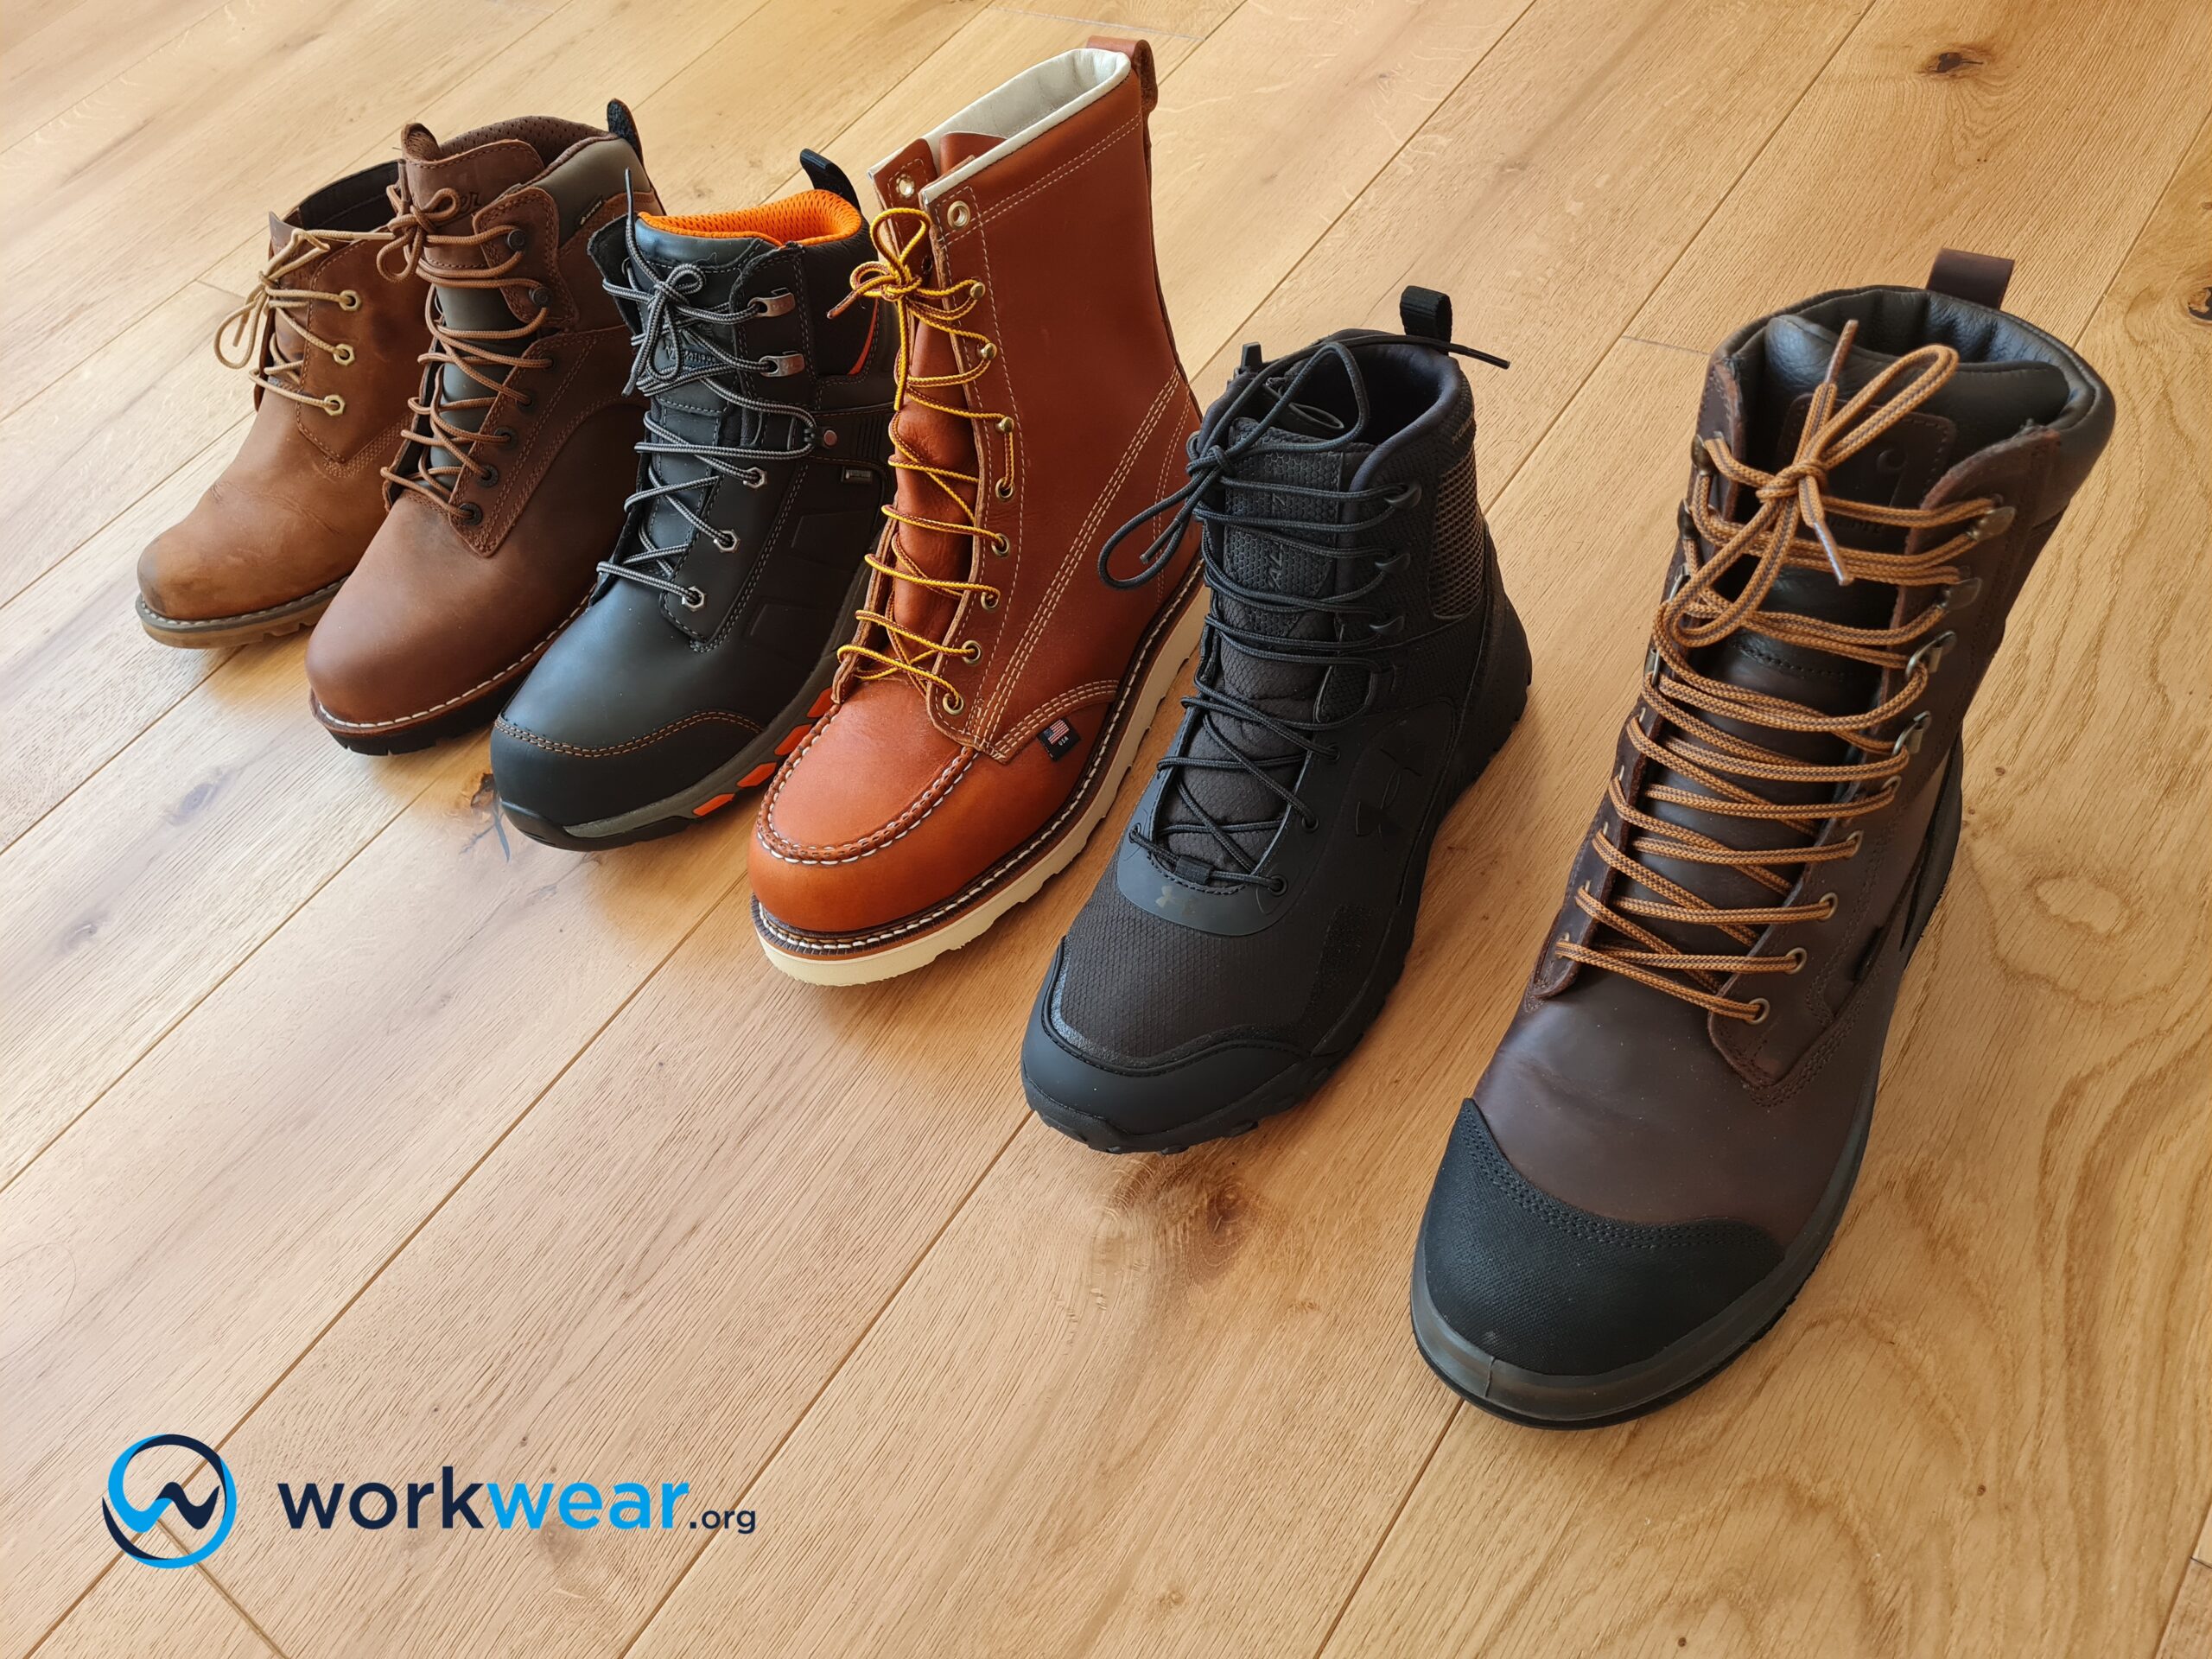 Most Popular Colors of Work Boots